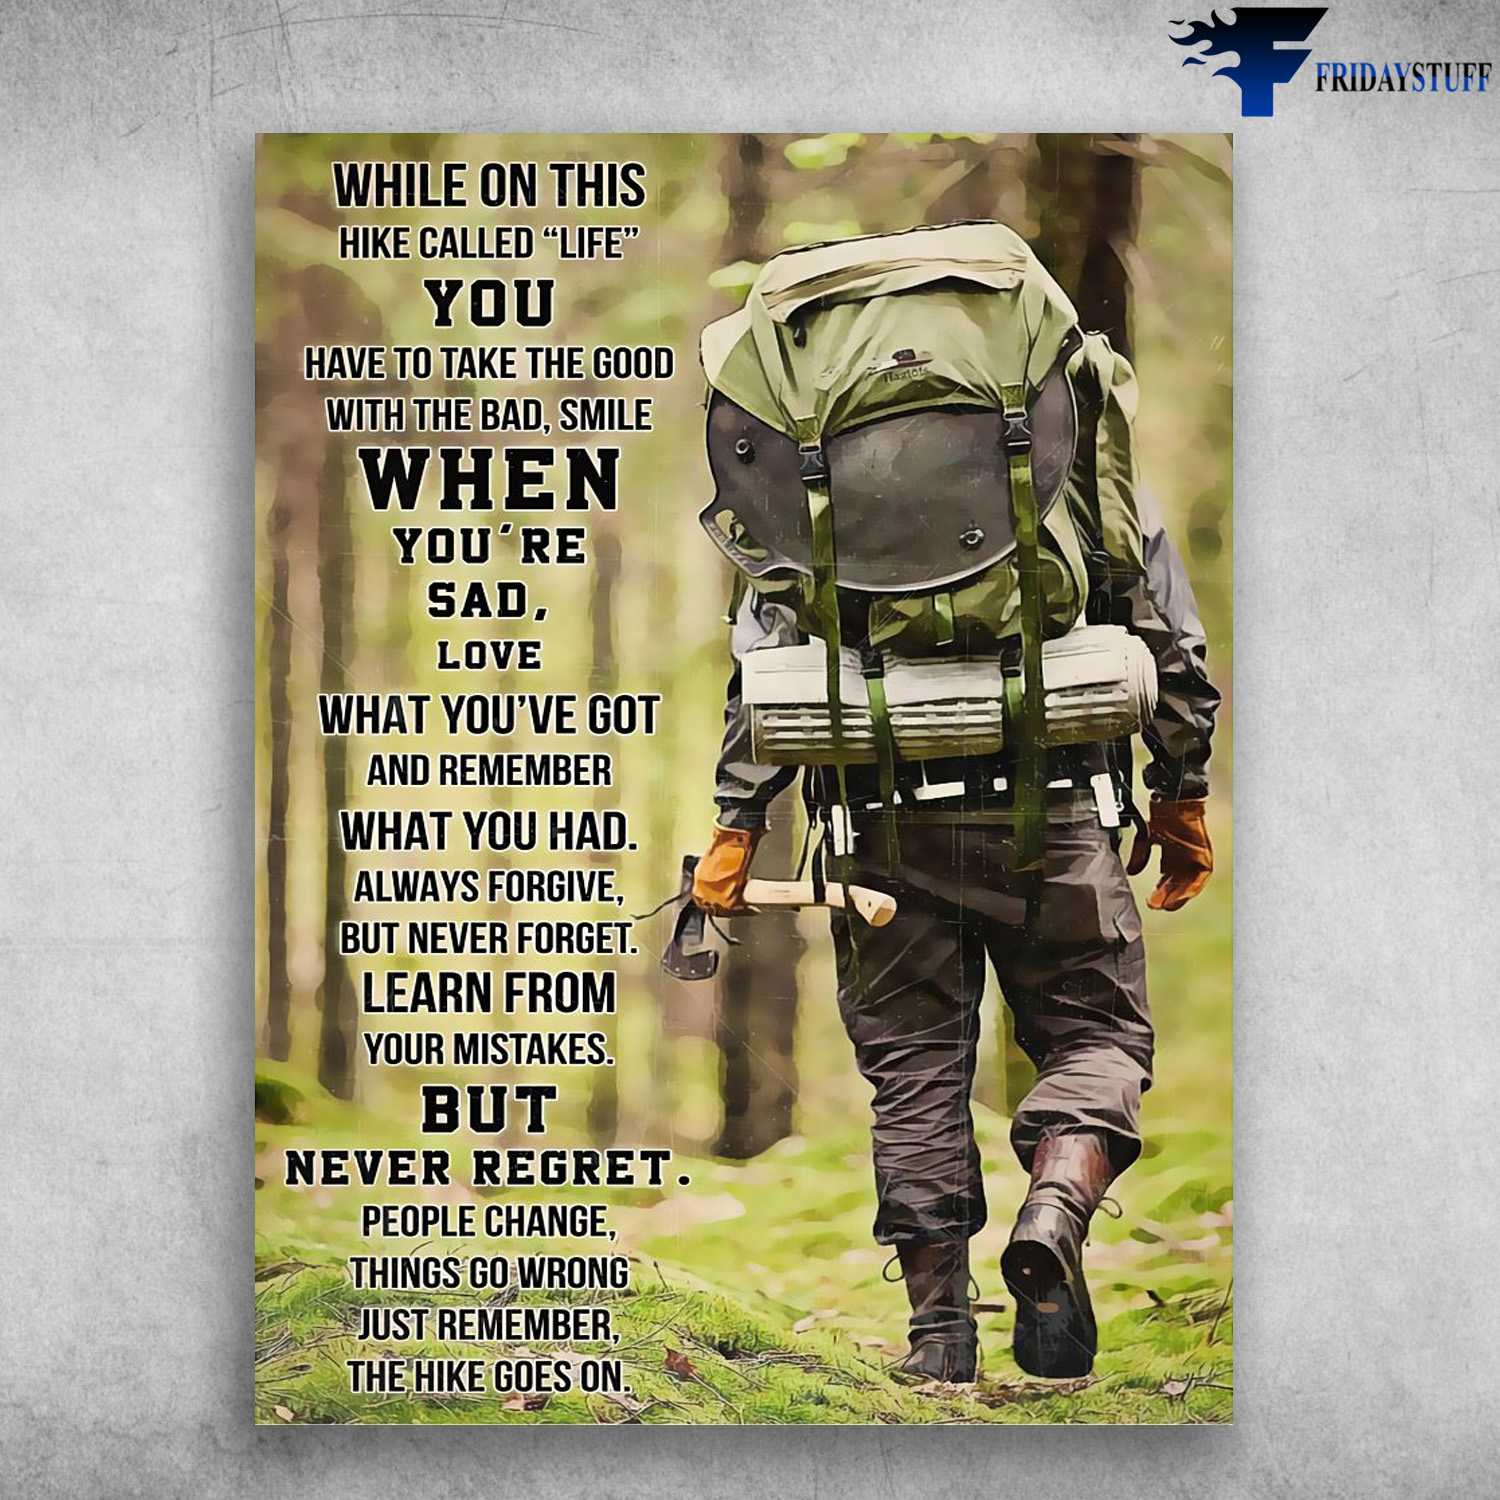 Hiking Man, Hiking Poster - While On This Hike Called Life, You Have To Take The Good With The Bad, Smile When You're Sad, Love What You've Got, And Remember What You Had